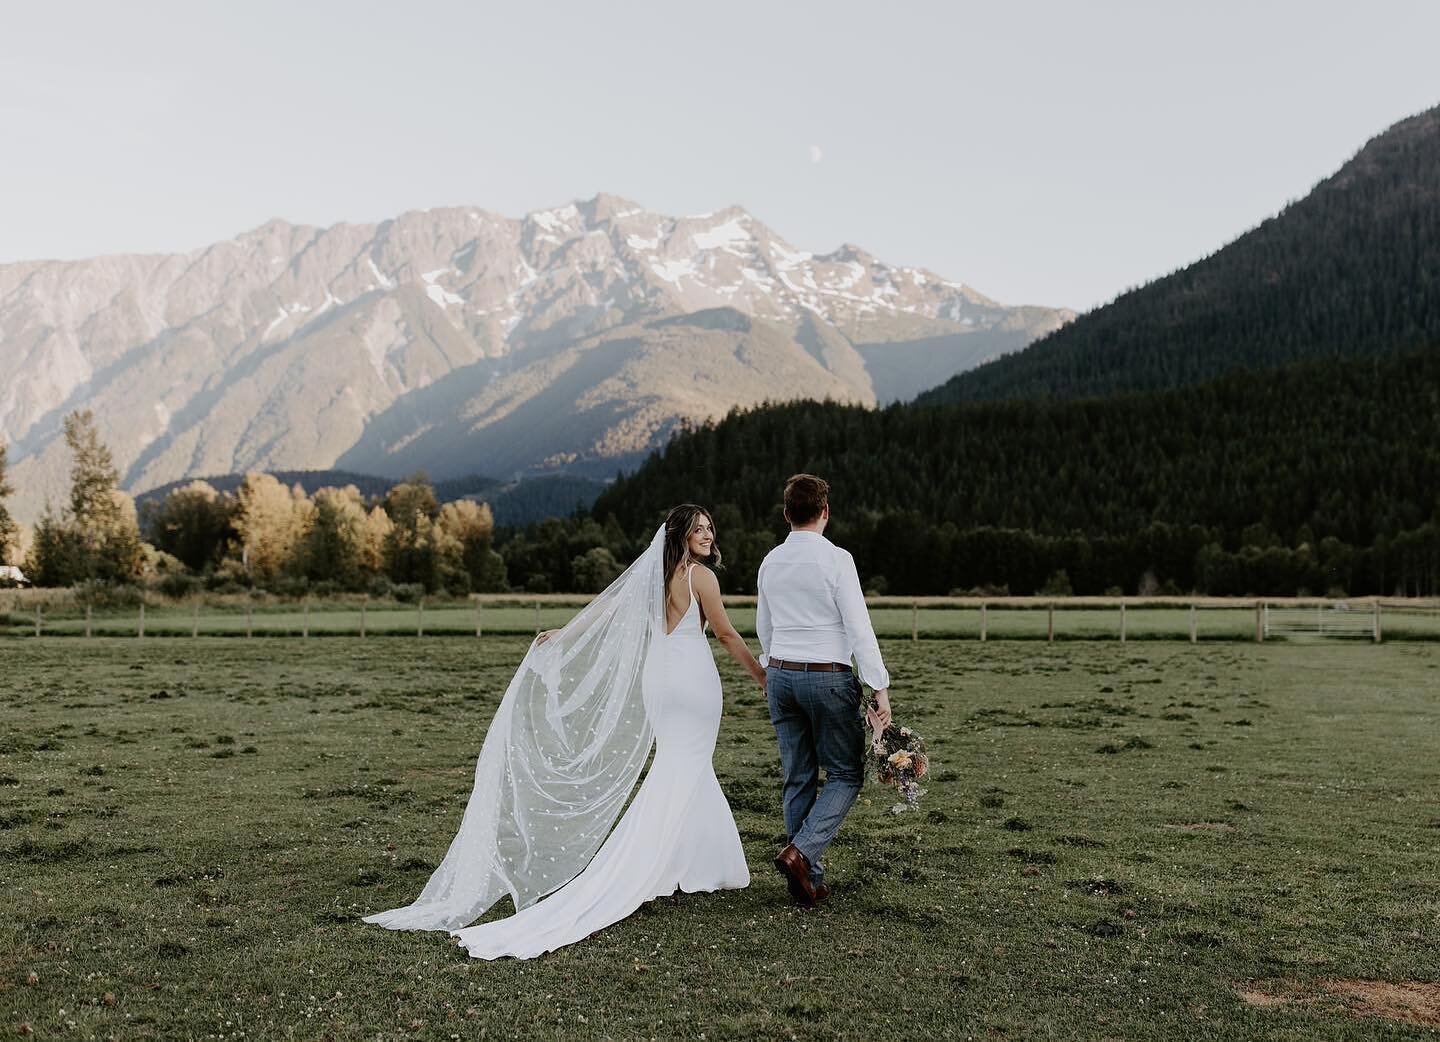 A west coast wedding at its finest! 🏔️ 

We absolutely adore this picturesque backdrop for M &amp; B&rsquo;s wedding day. From ceremony to cocktail hour and finally reception, this majestic mountain proved to be the perfect scene!

_________________